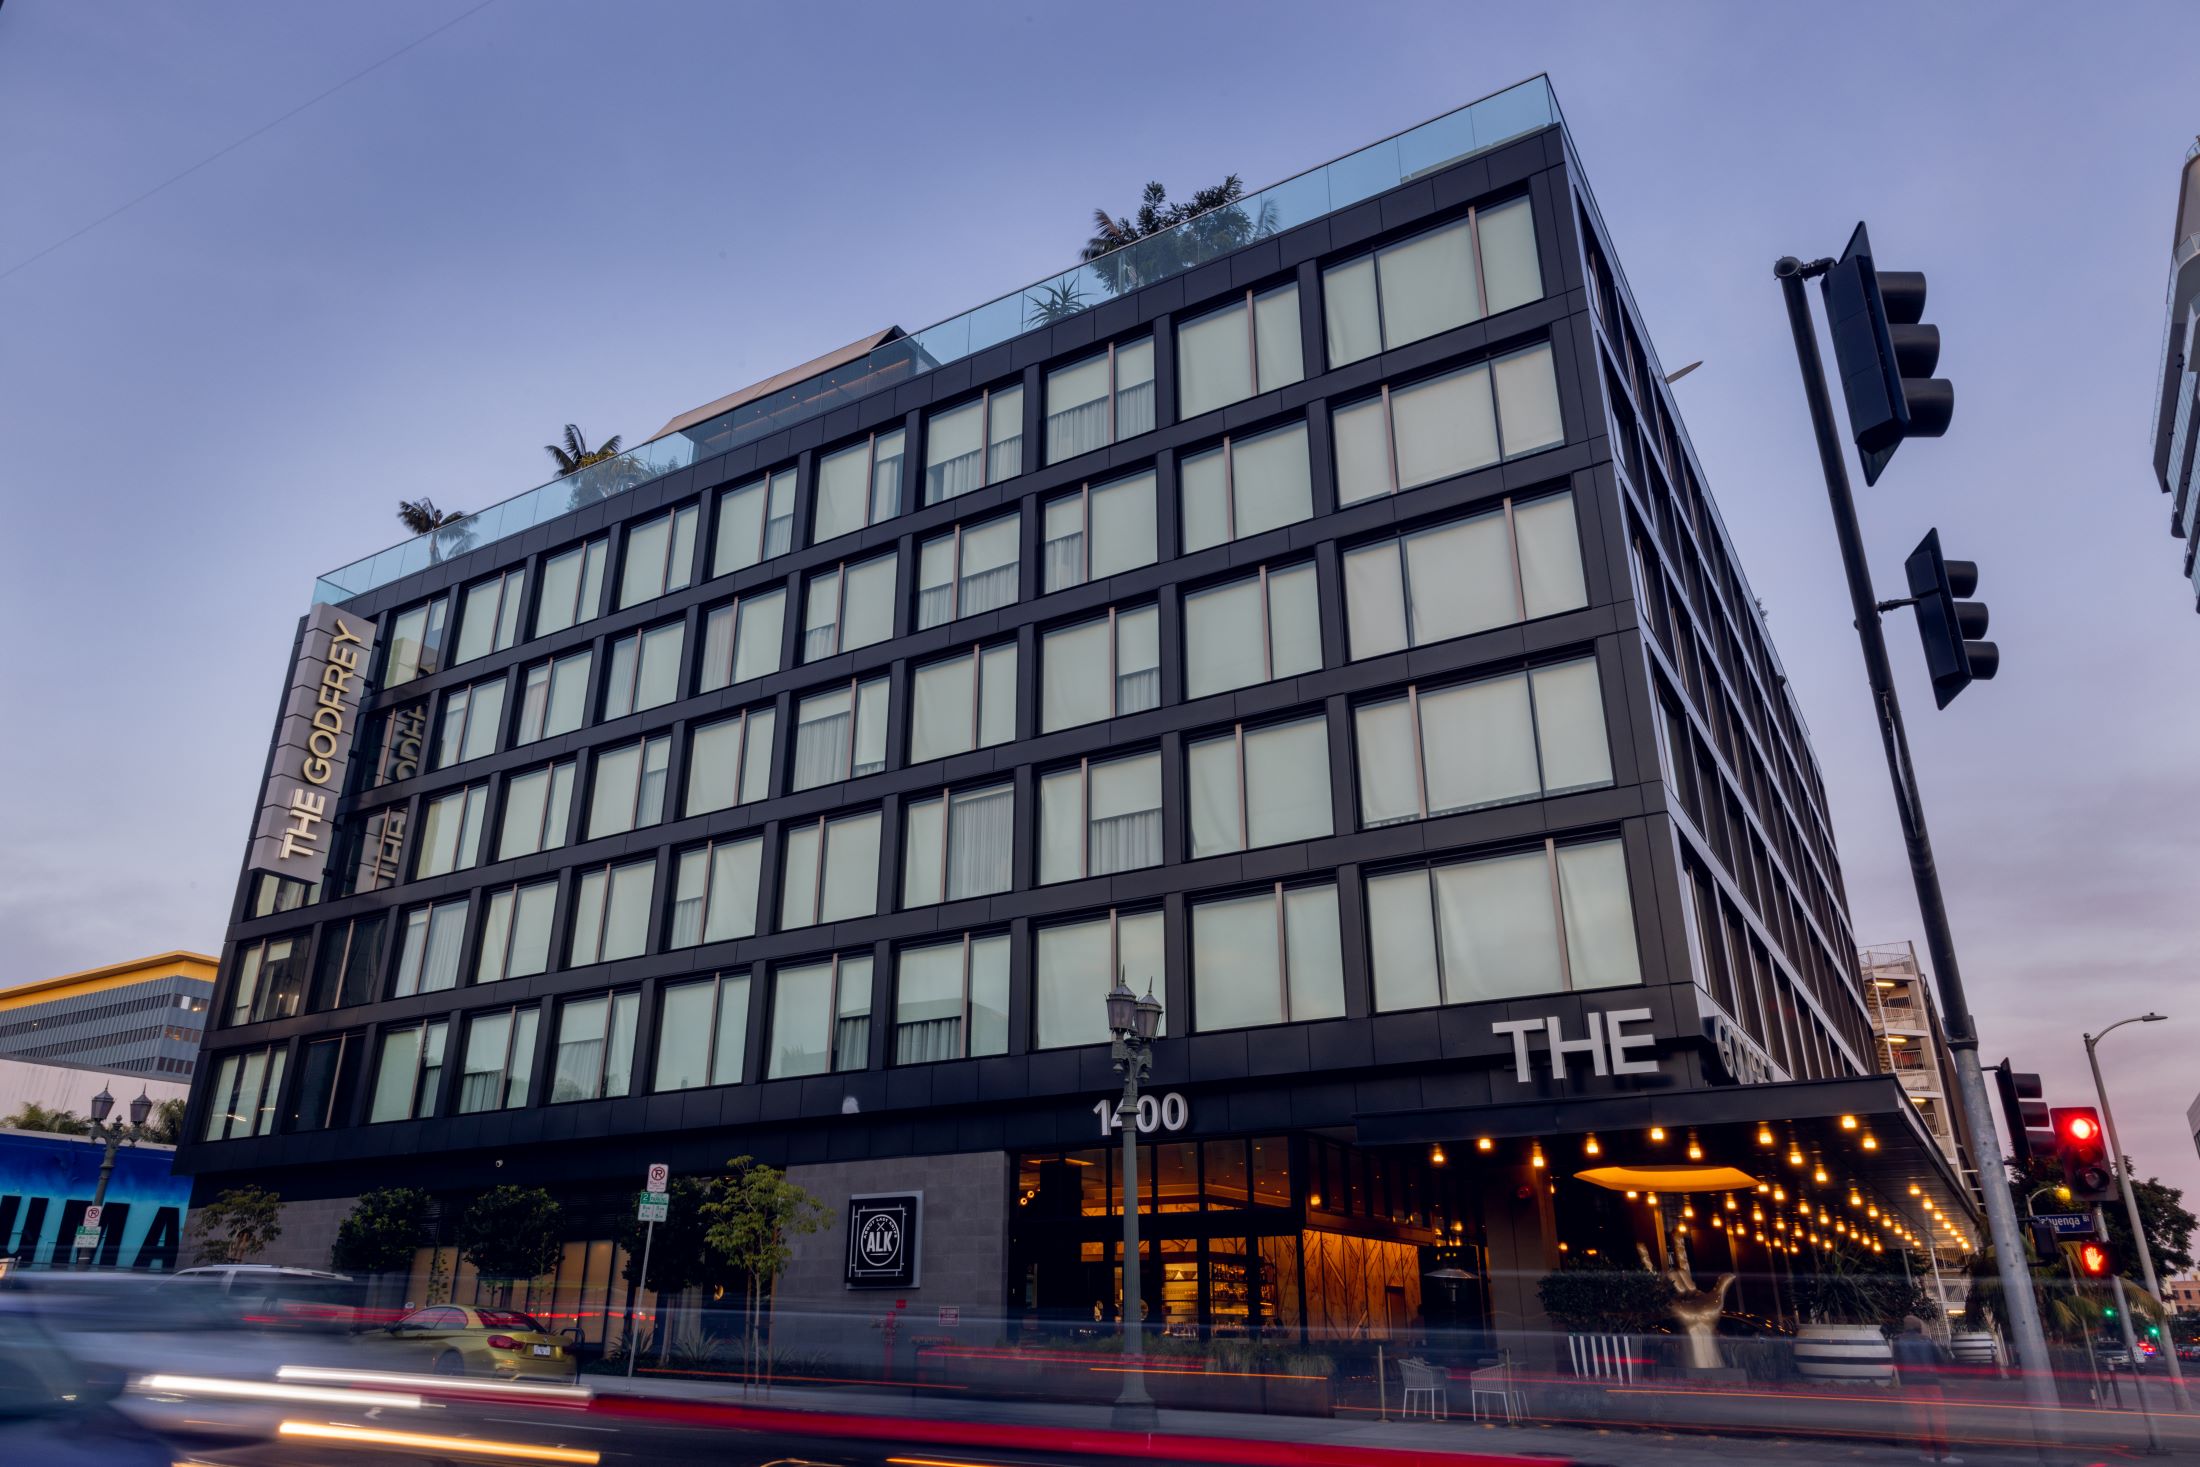 An image of the exterior of the Godfrey Hotel Hollywood.